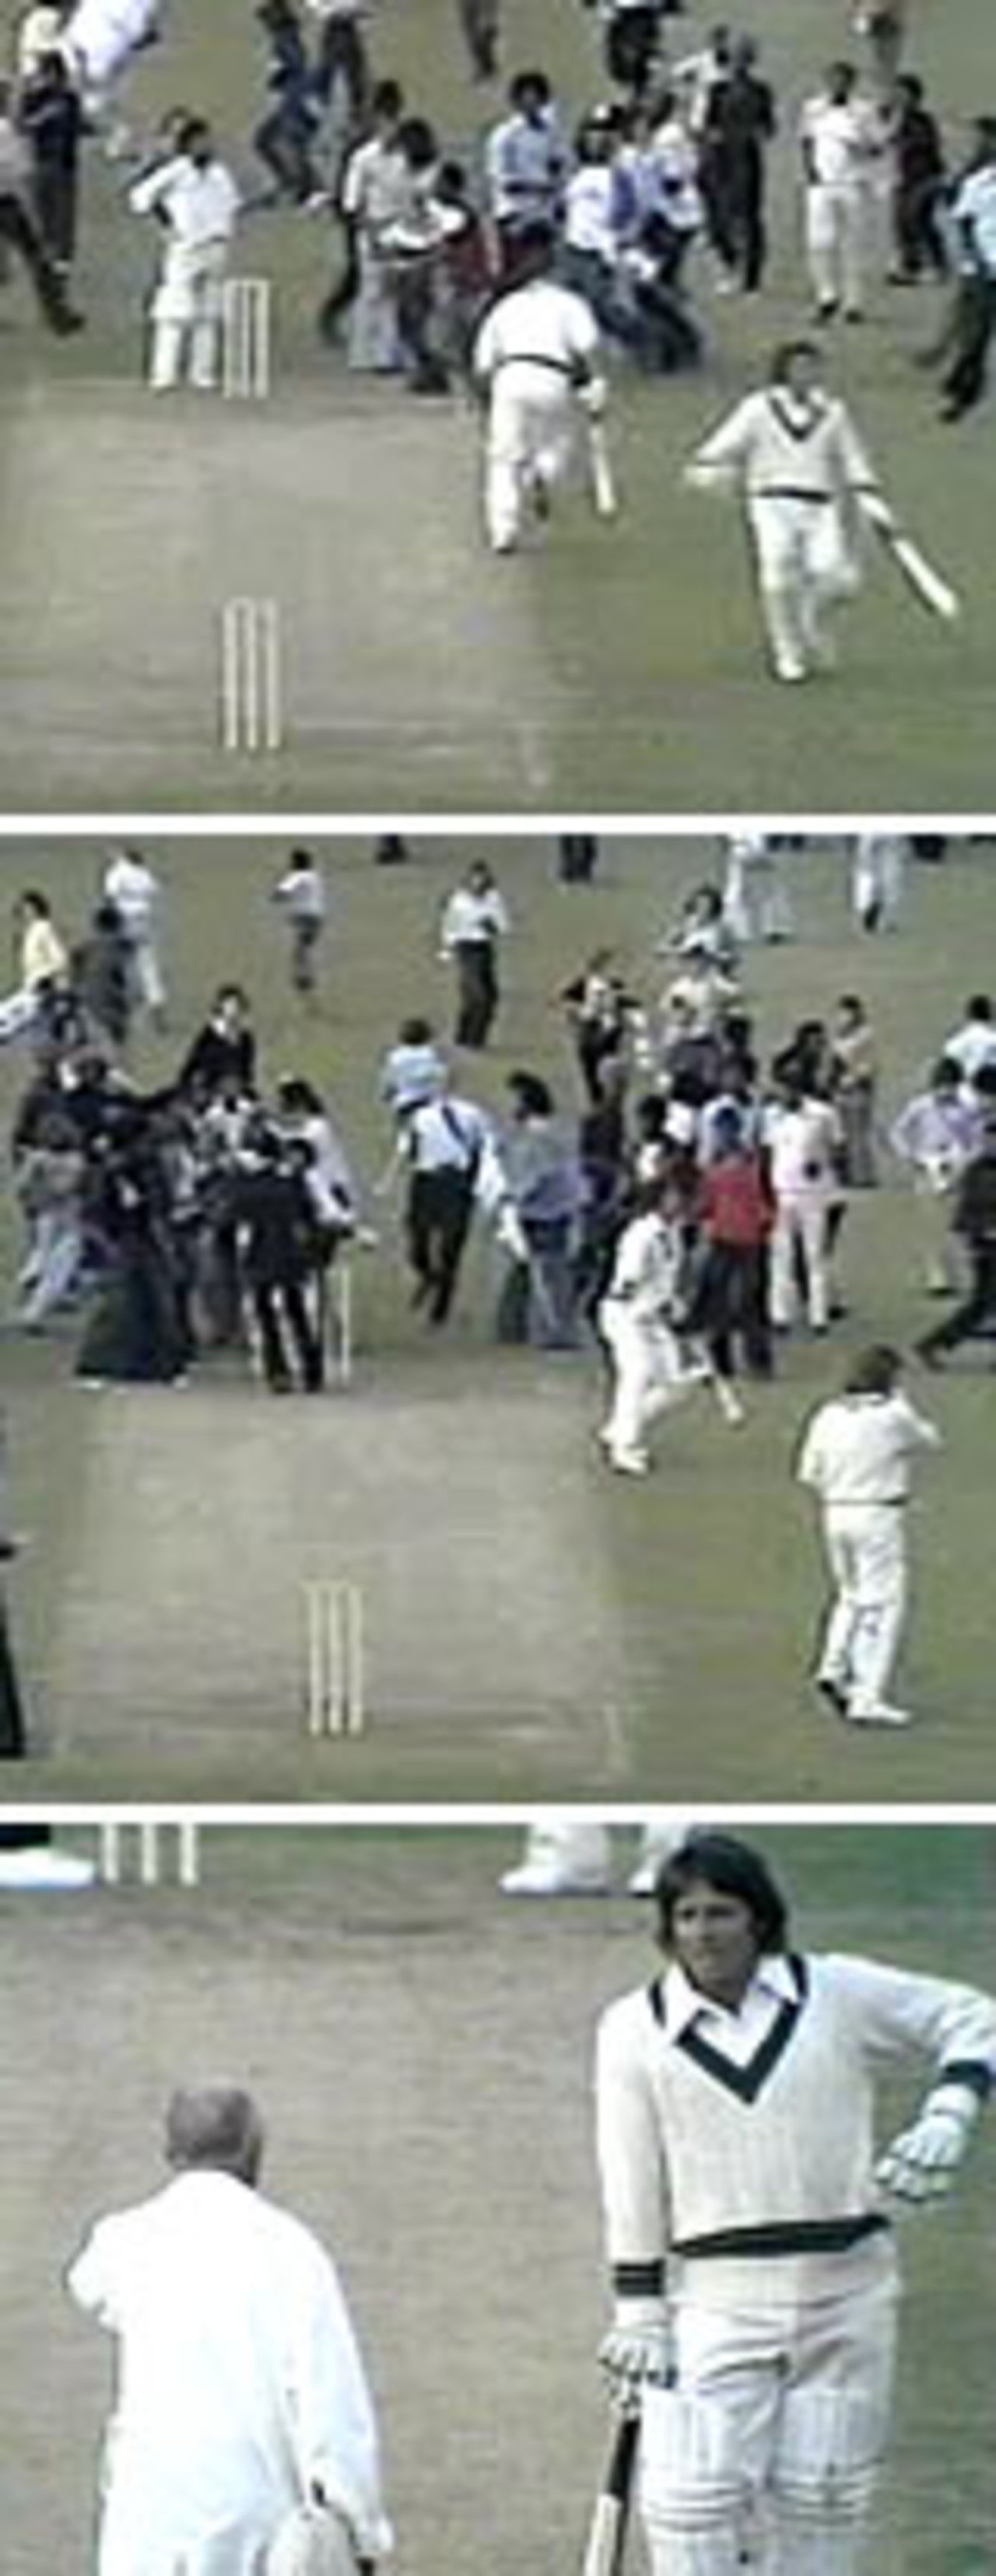 Confusion in the World Cup final as Jeff Thomson is caught off a no-ball and the crowd invade the pitch. With Dennis Lillee, Thomson ran three before opting to stay put as spectators enveloped the field. In the end, the pair were awarded four runs, West Indies v Australia, Lord's, June 21, 1975